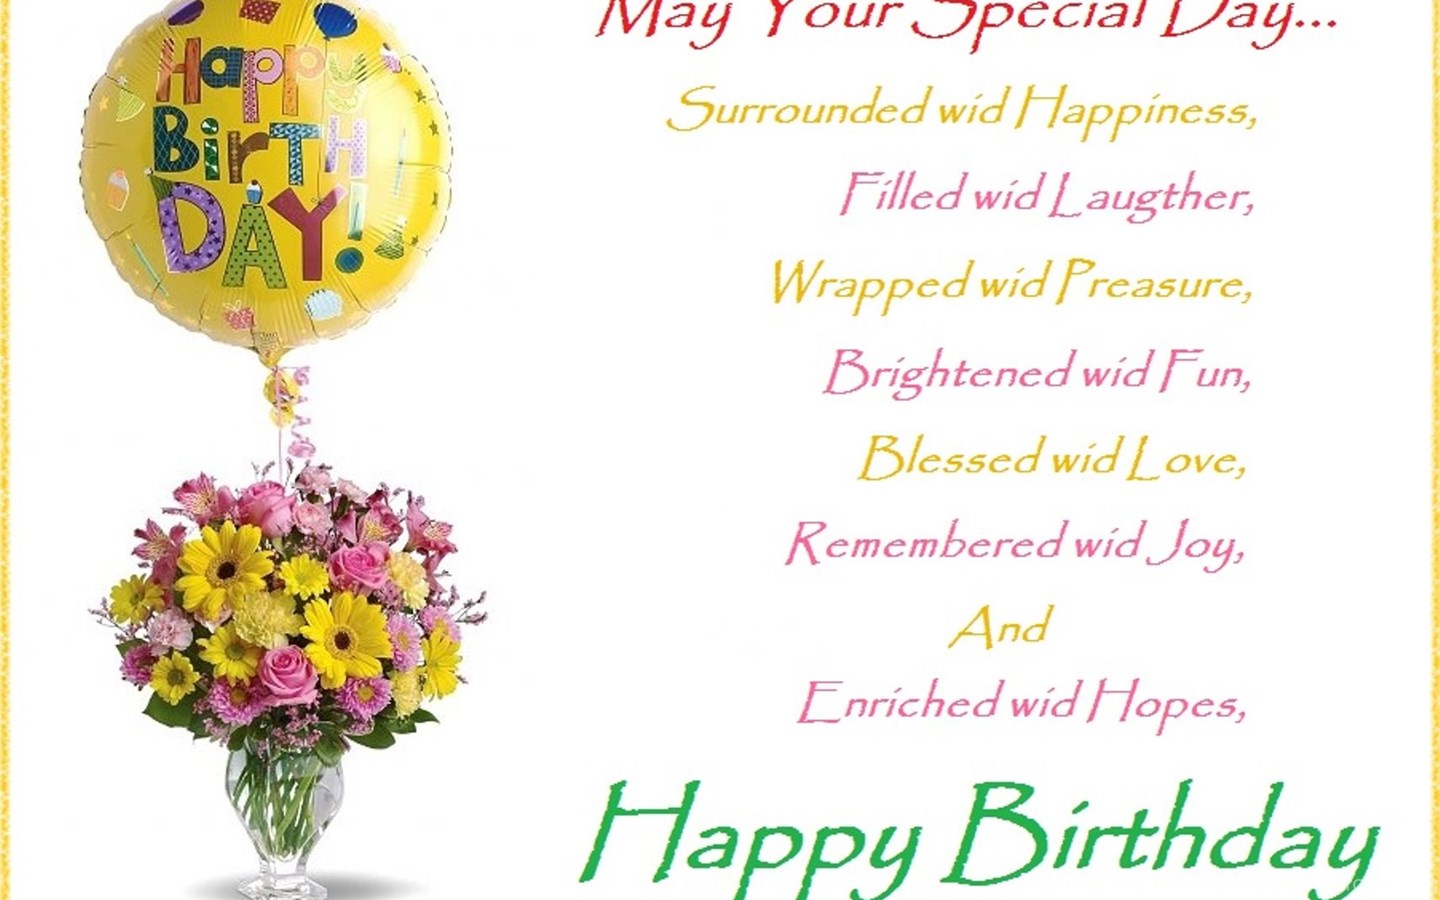 Download Happy Birthday Wallpapers With Quotes Popular 1440x900 Desktop Bac...